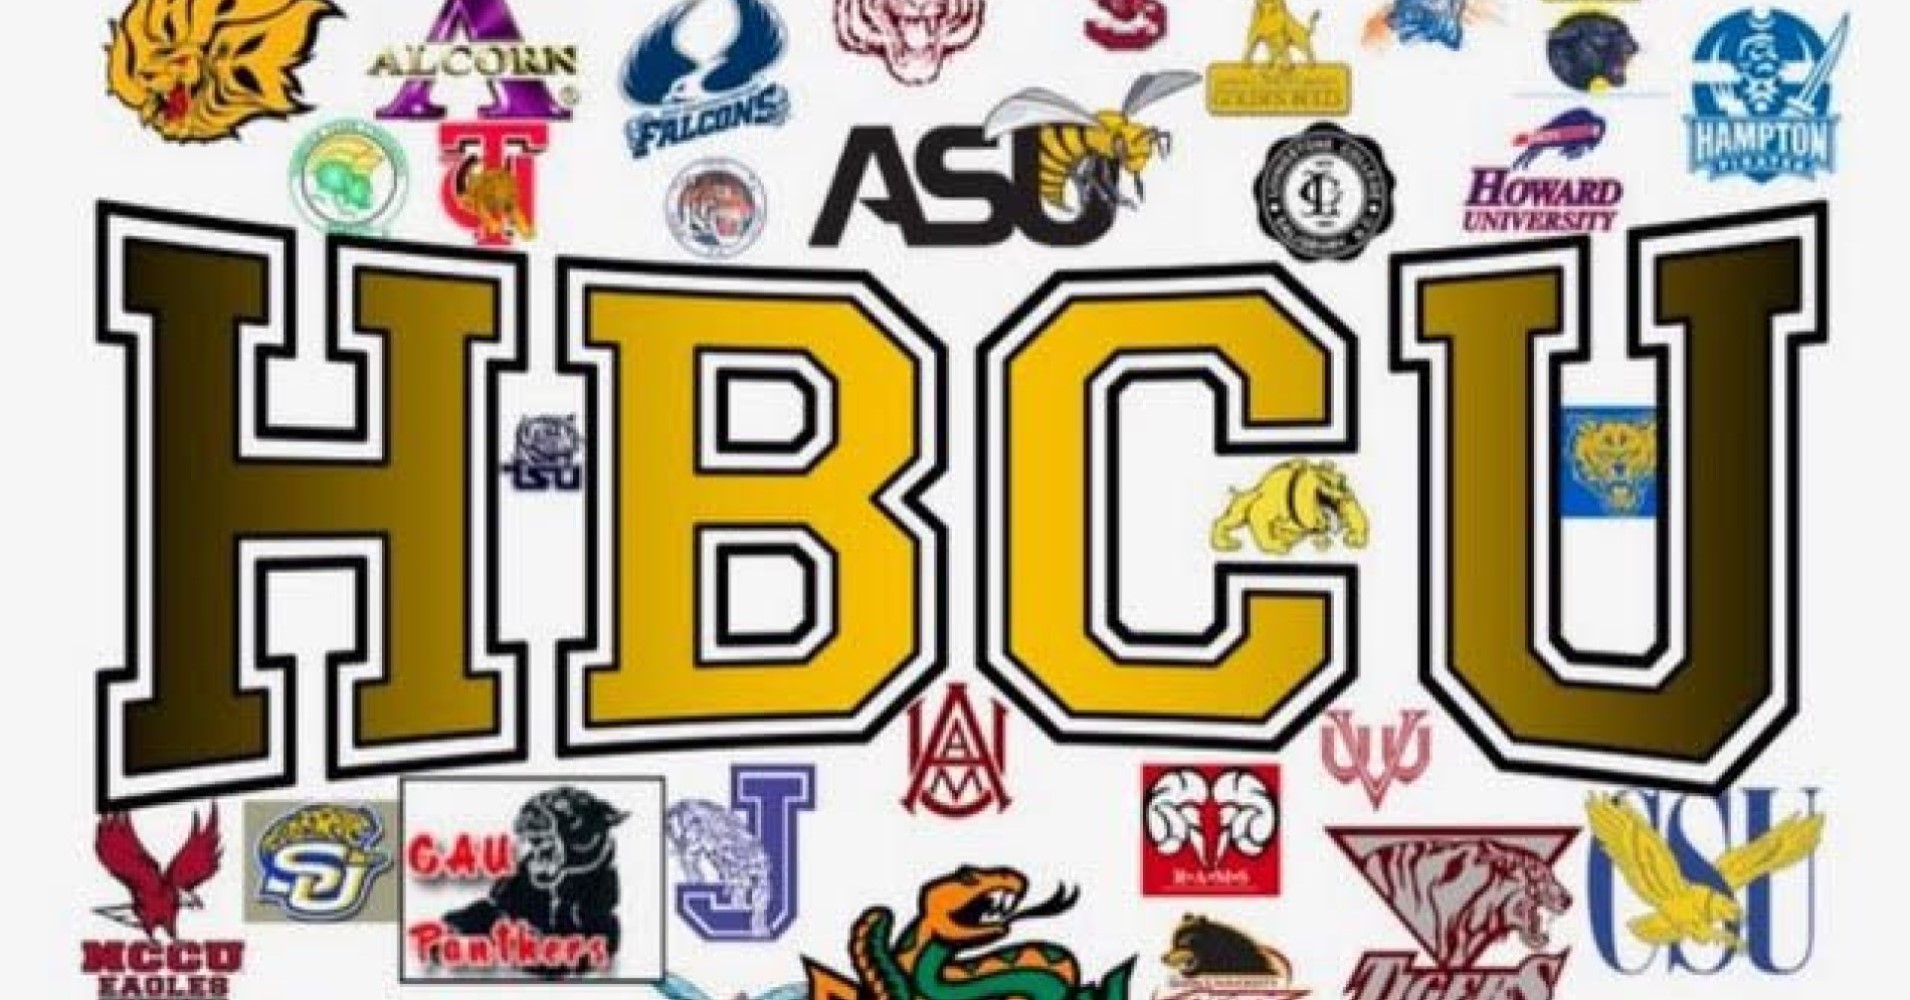 4 Reasons Why You Should Consider an HBCU Niche Blog